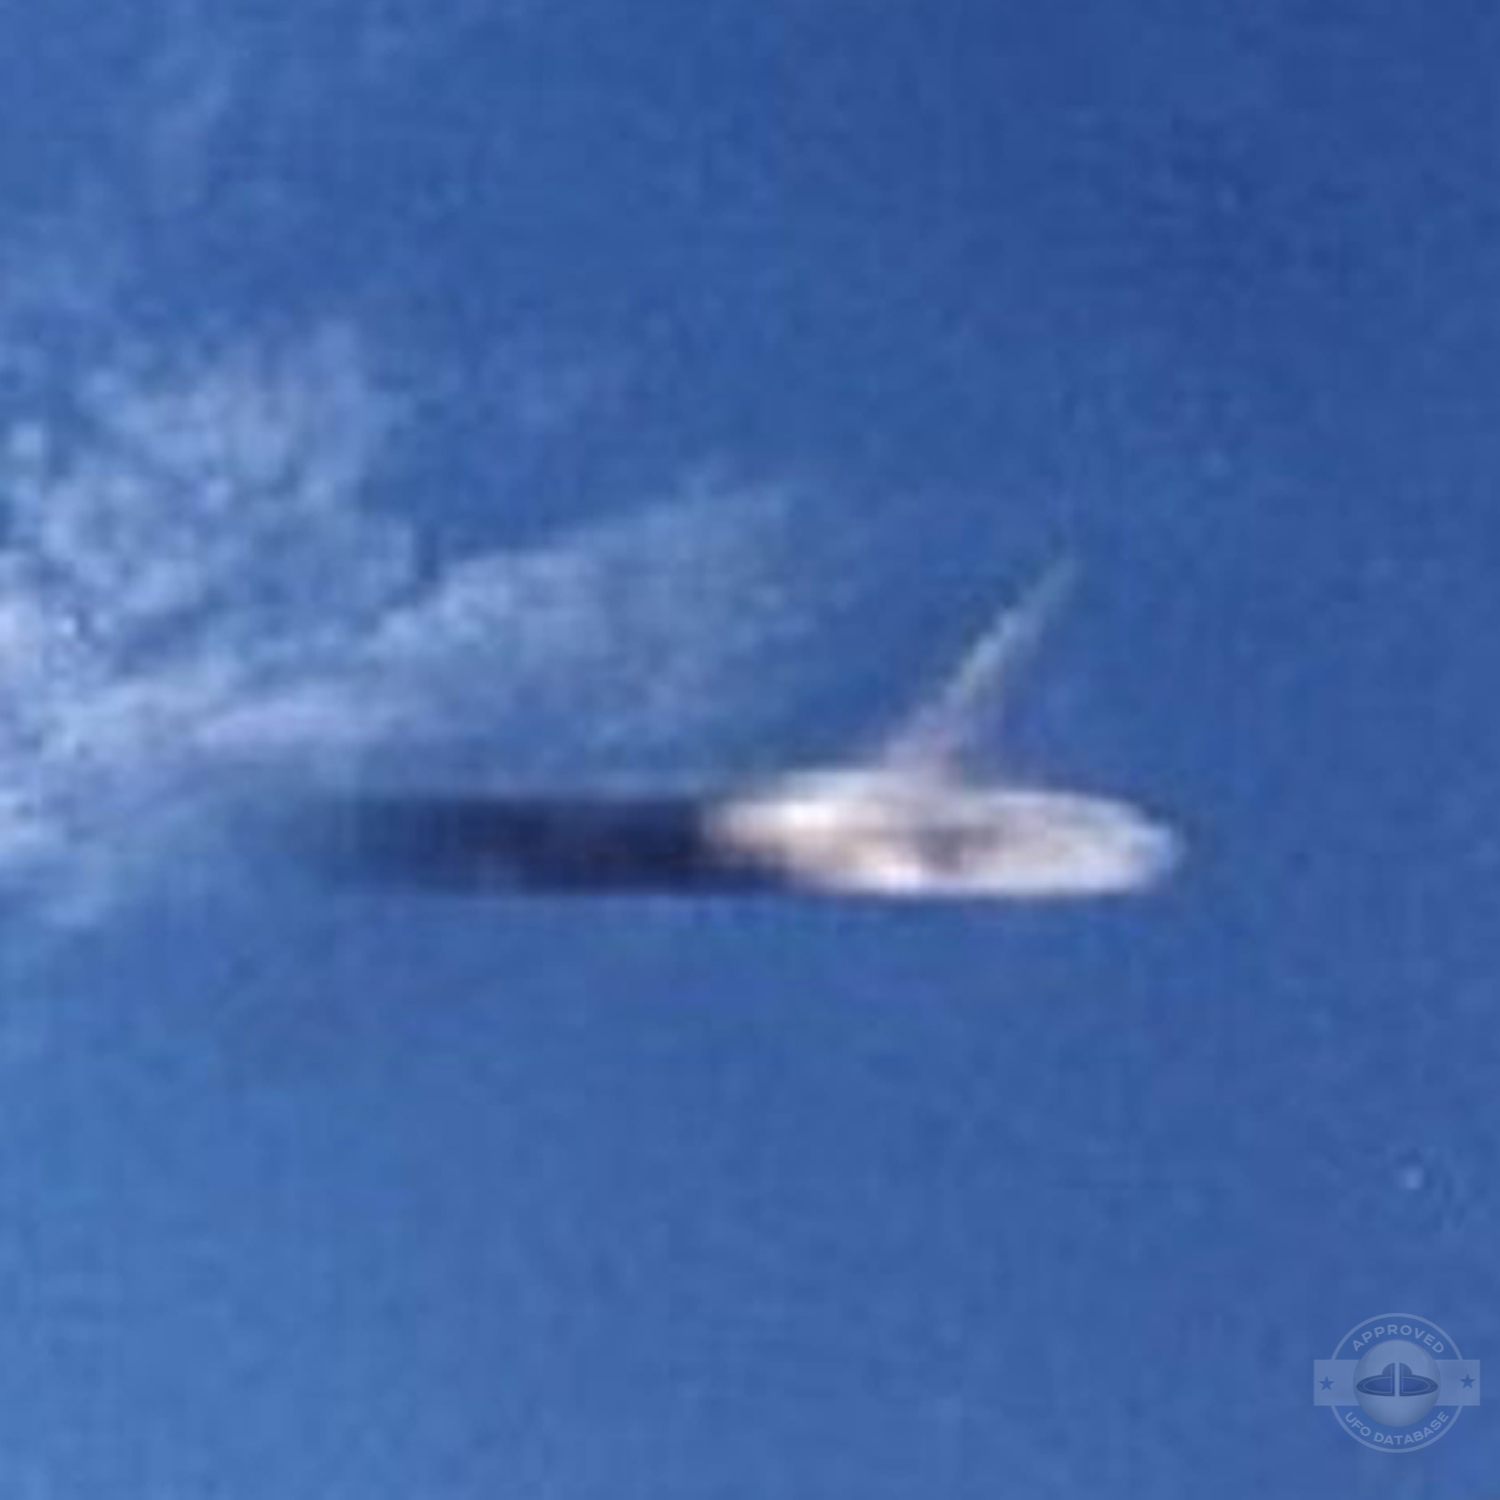 UFO picture shows movement of UFO by capturing the trace of the UFO UFO Picture #181-5